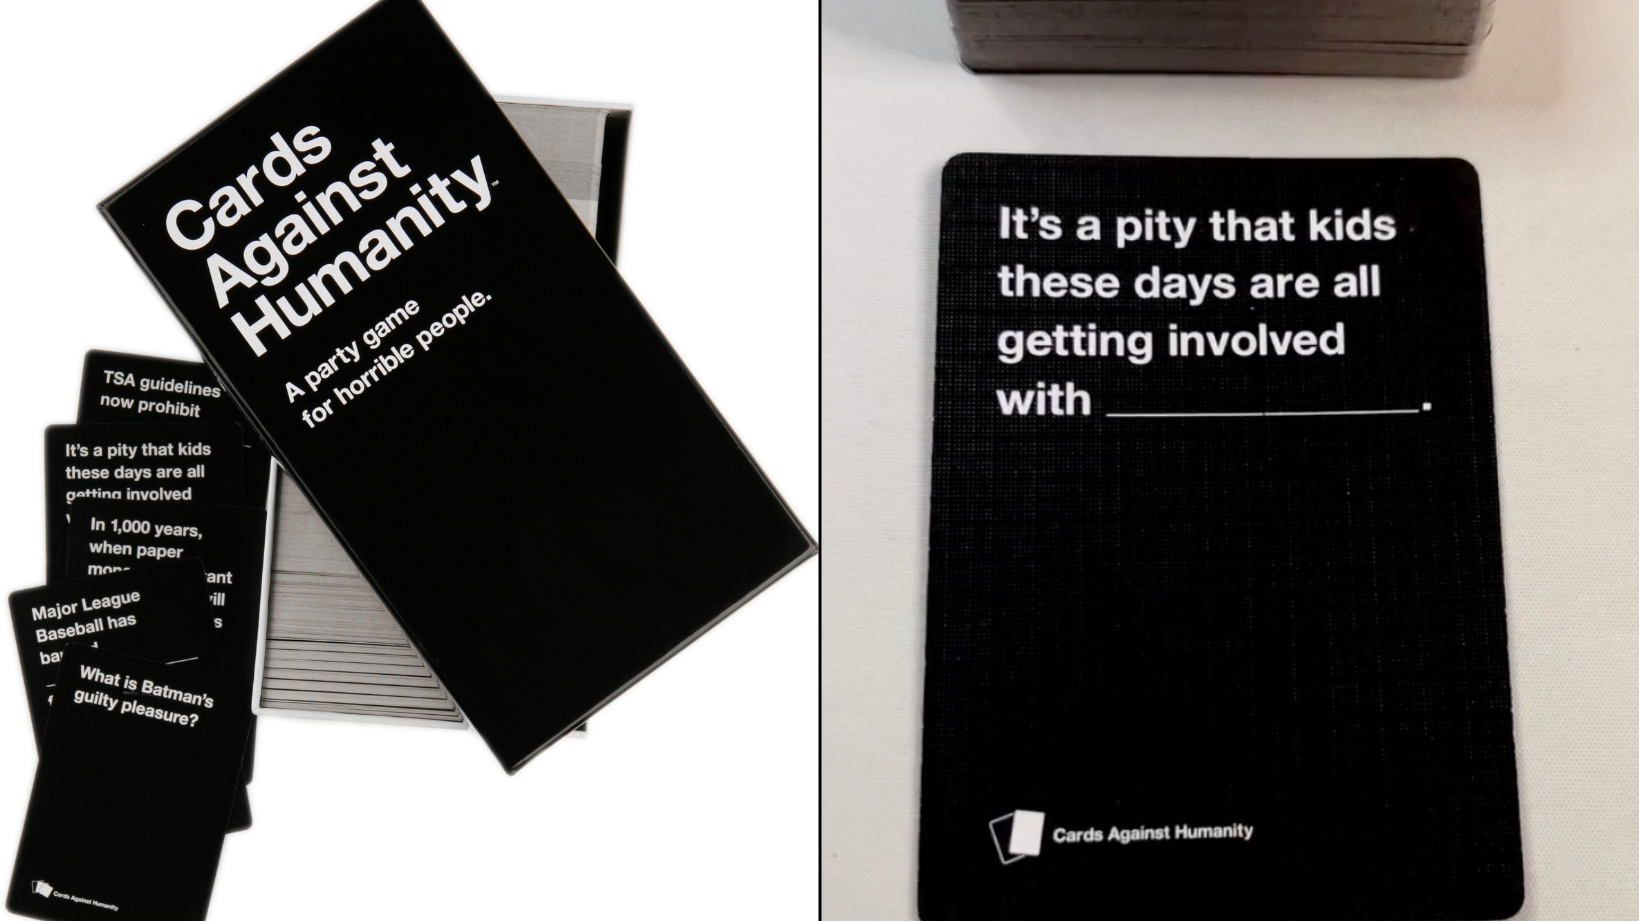 Cards Against Humanity is free to download and use as family game